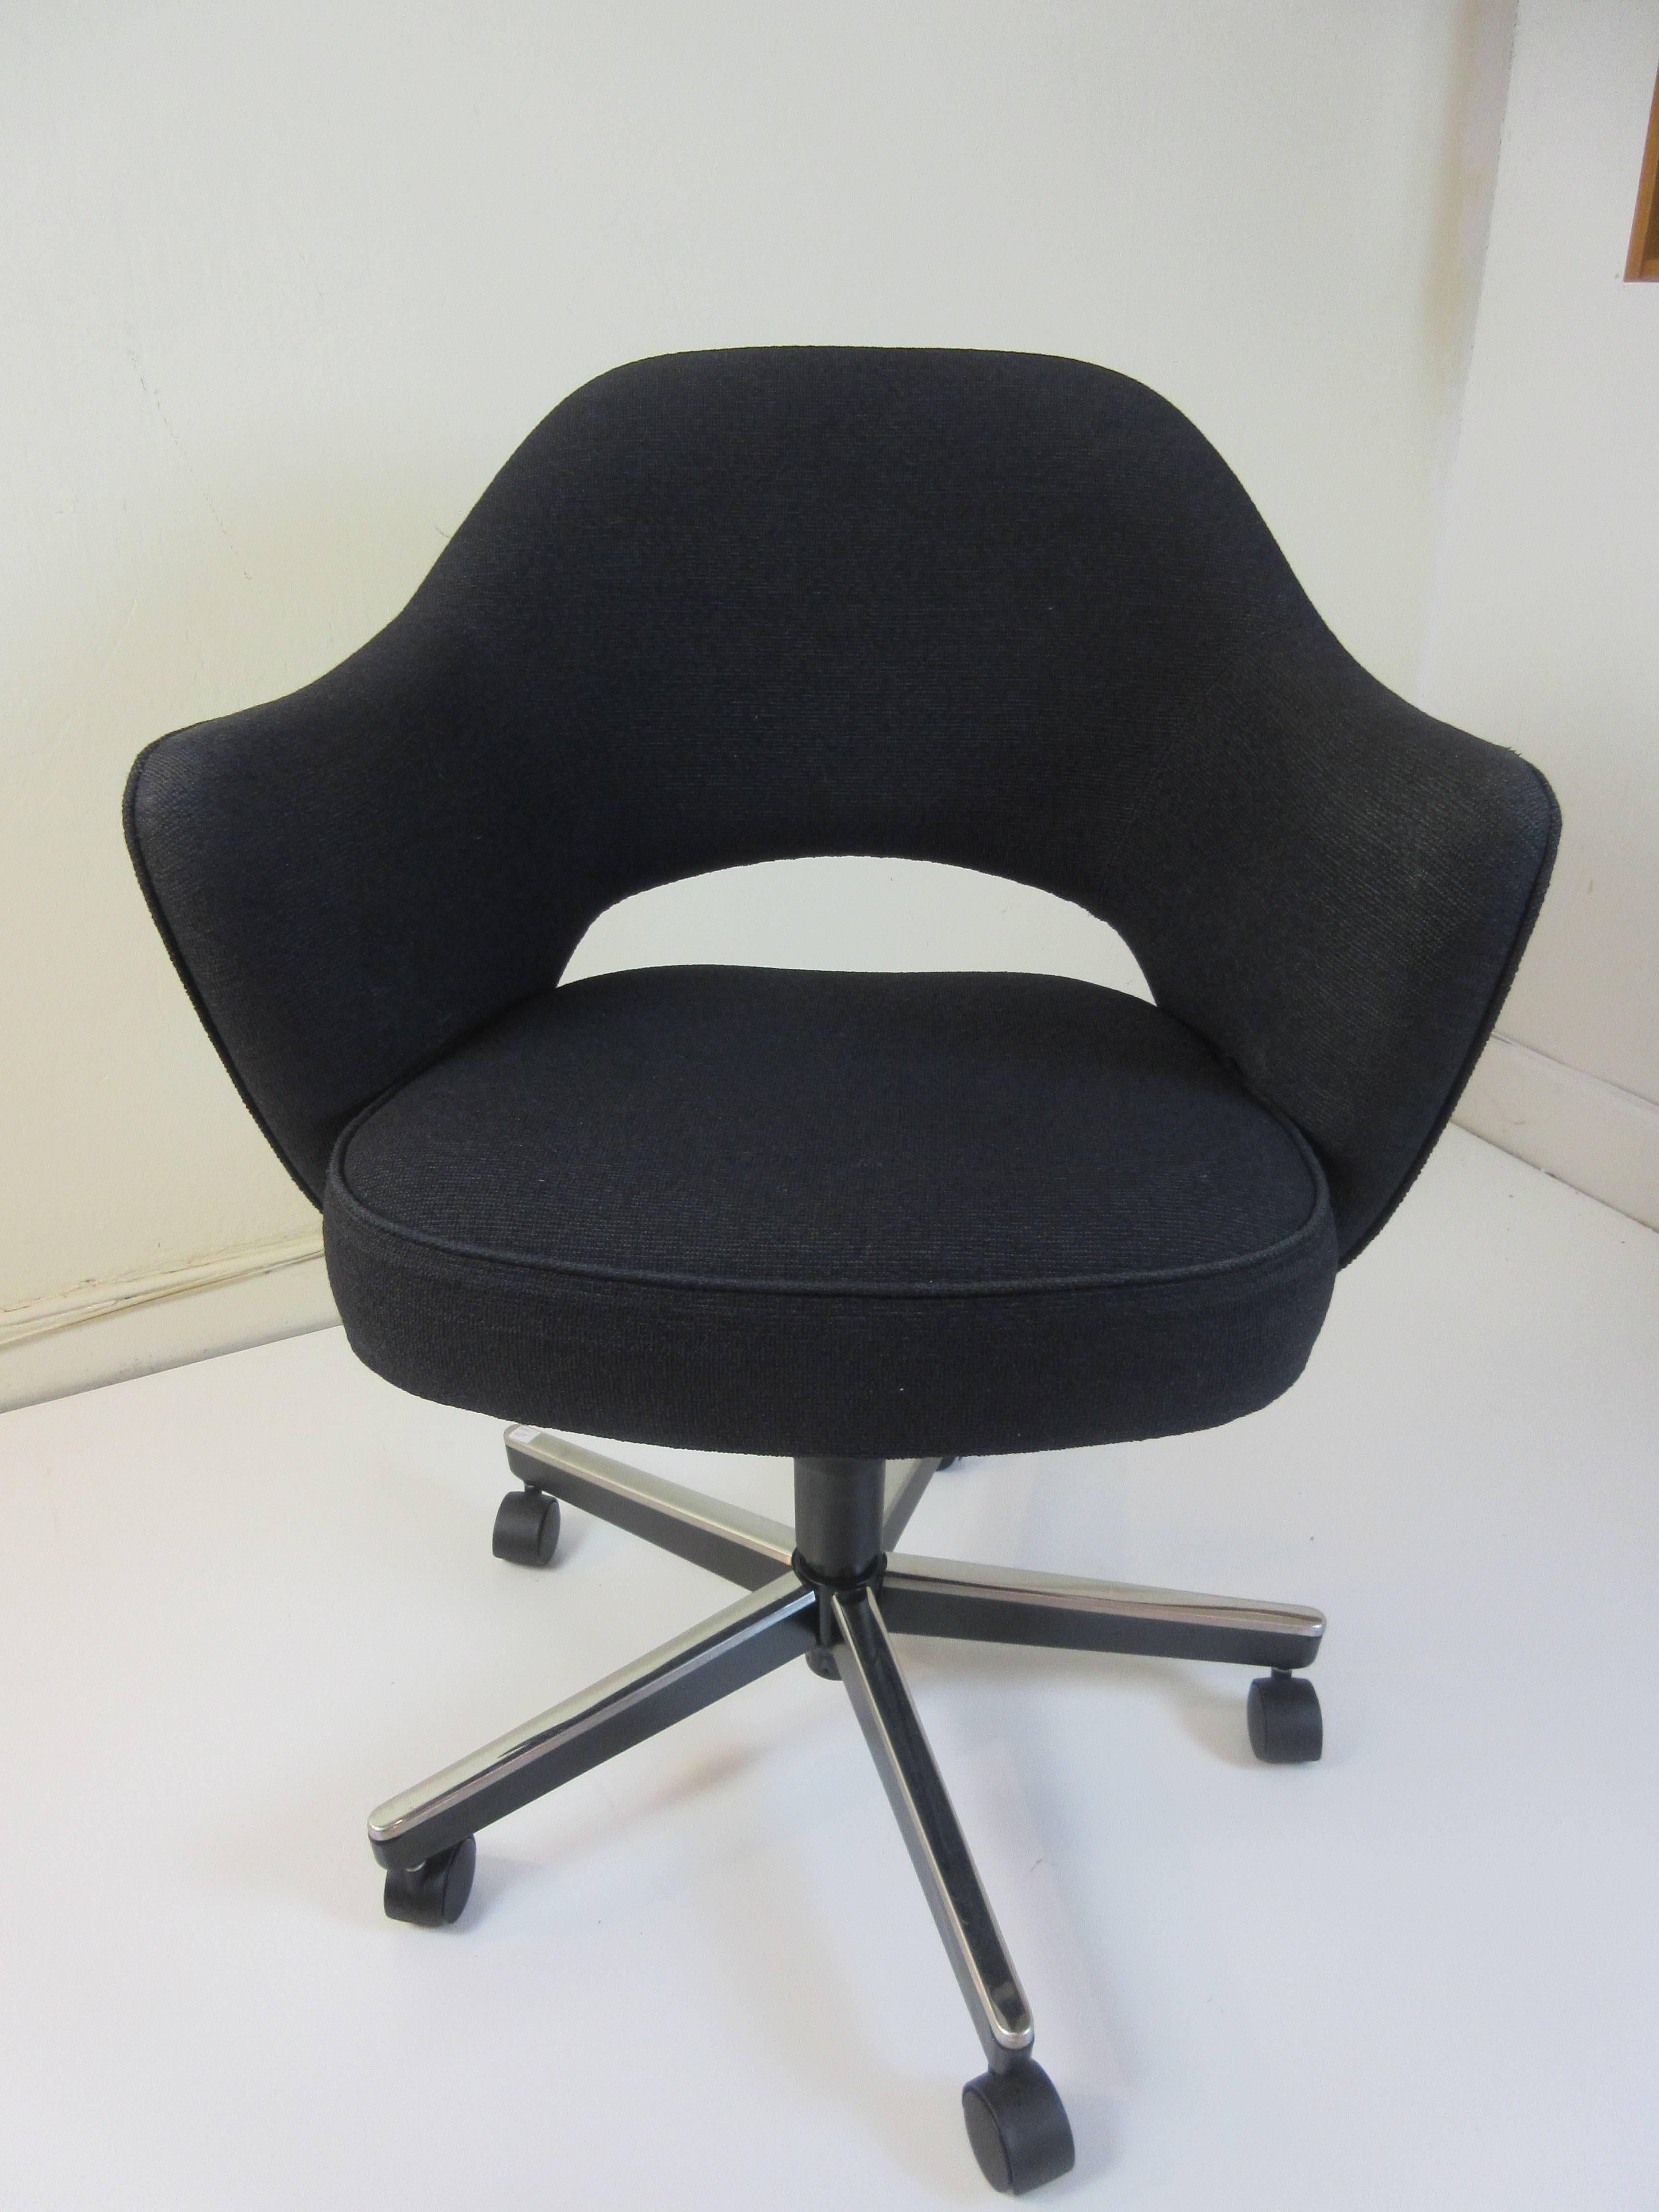 Eero Saarinen for Knoll office swivel chair with elevation adjustment in black hopsack fabric on a Osha compliant five star base. Seat raises 5.4 inches and measurements give are for the lowest.